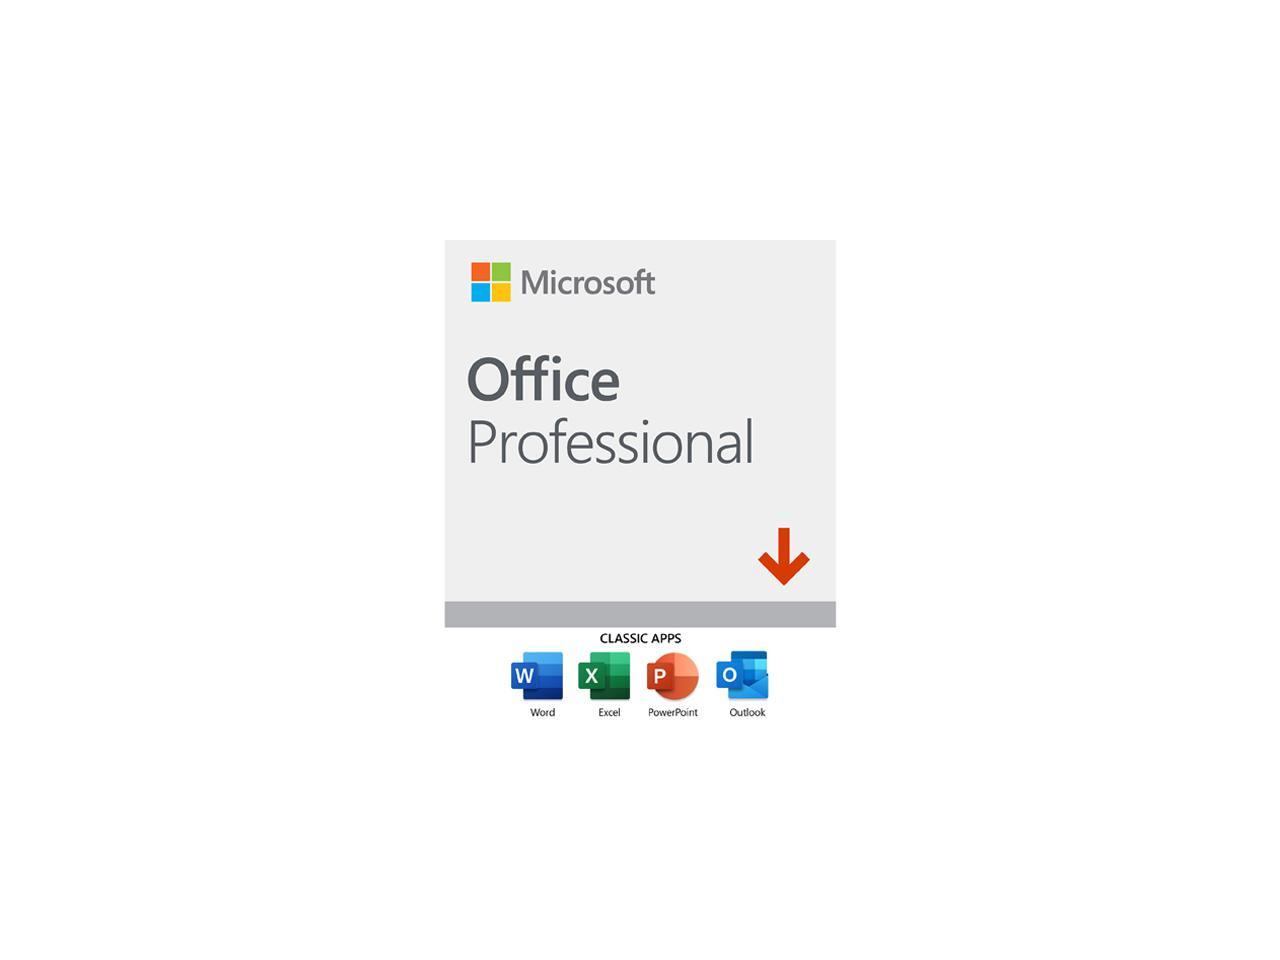 Microsoft Office Professional 2019 - 1 device, Windows 10, Download